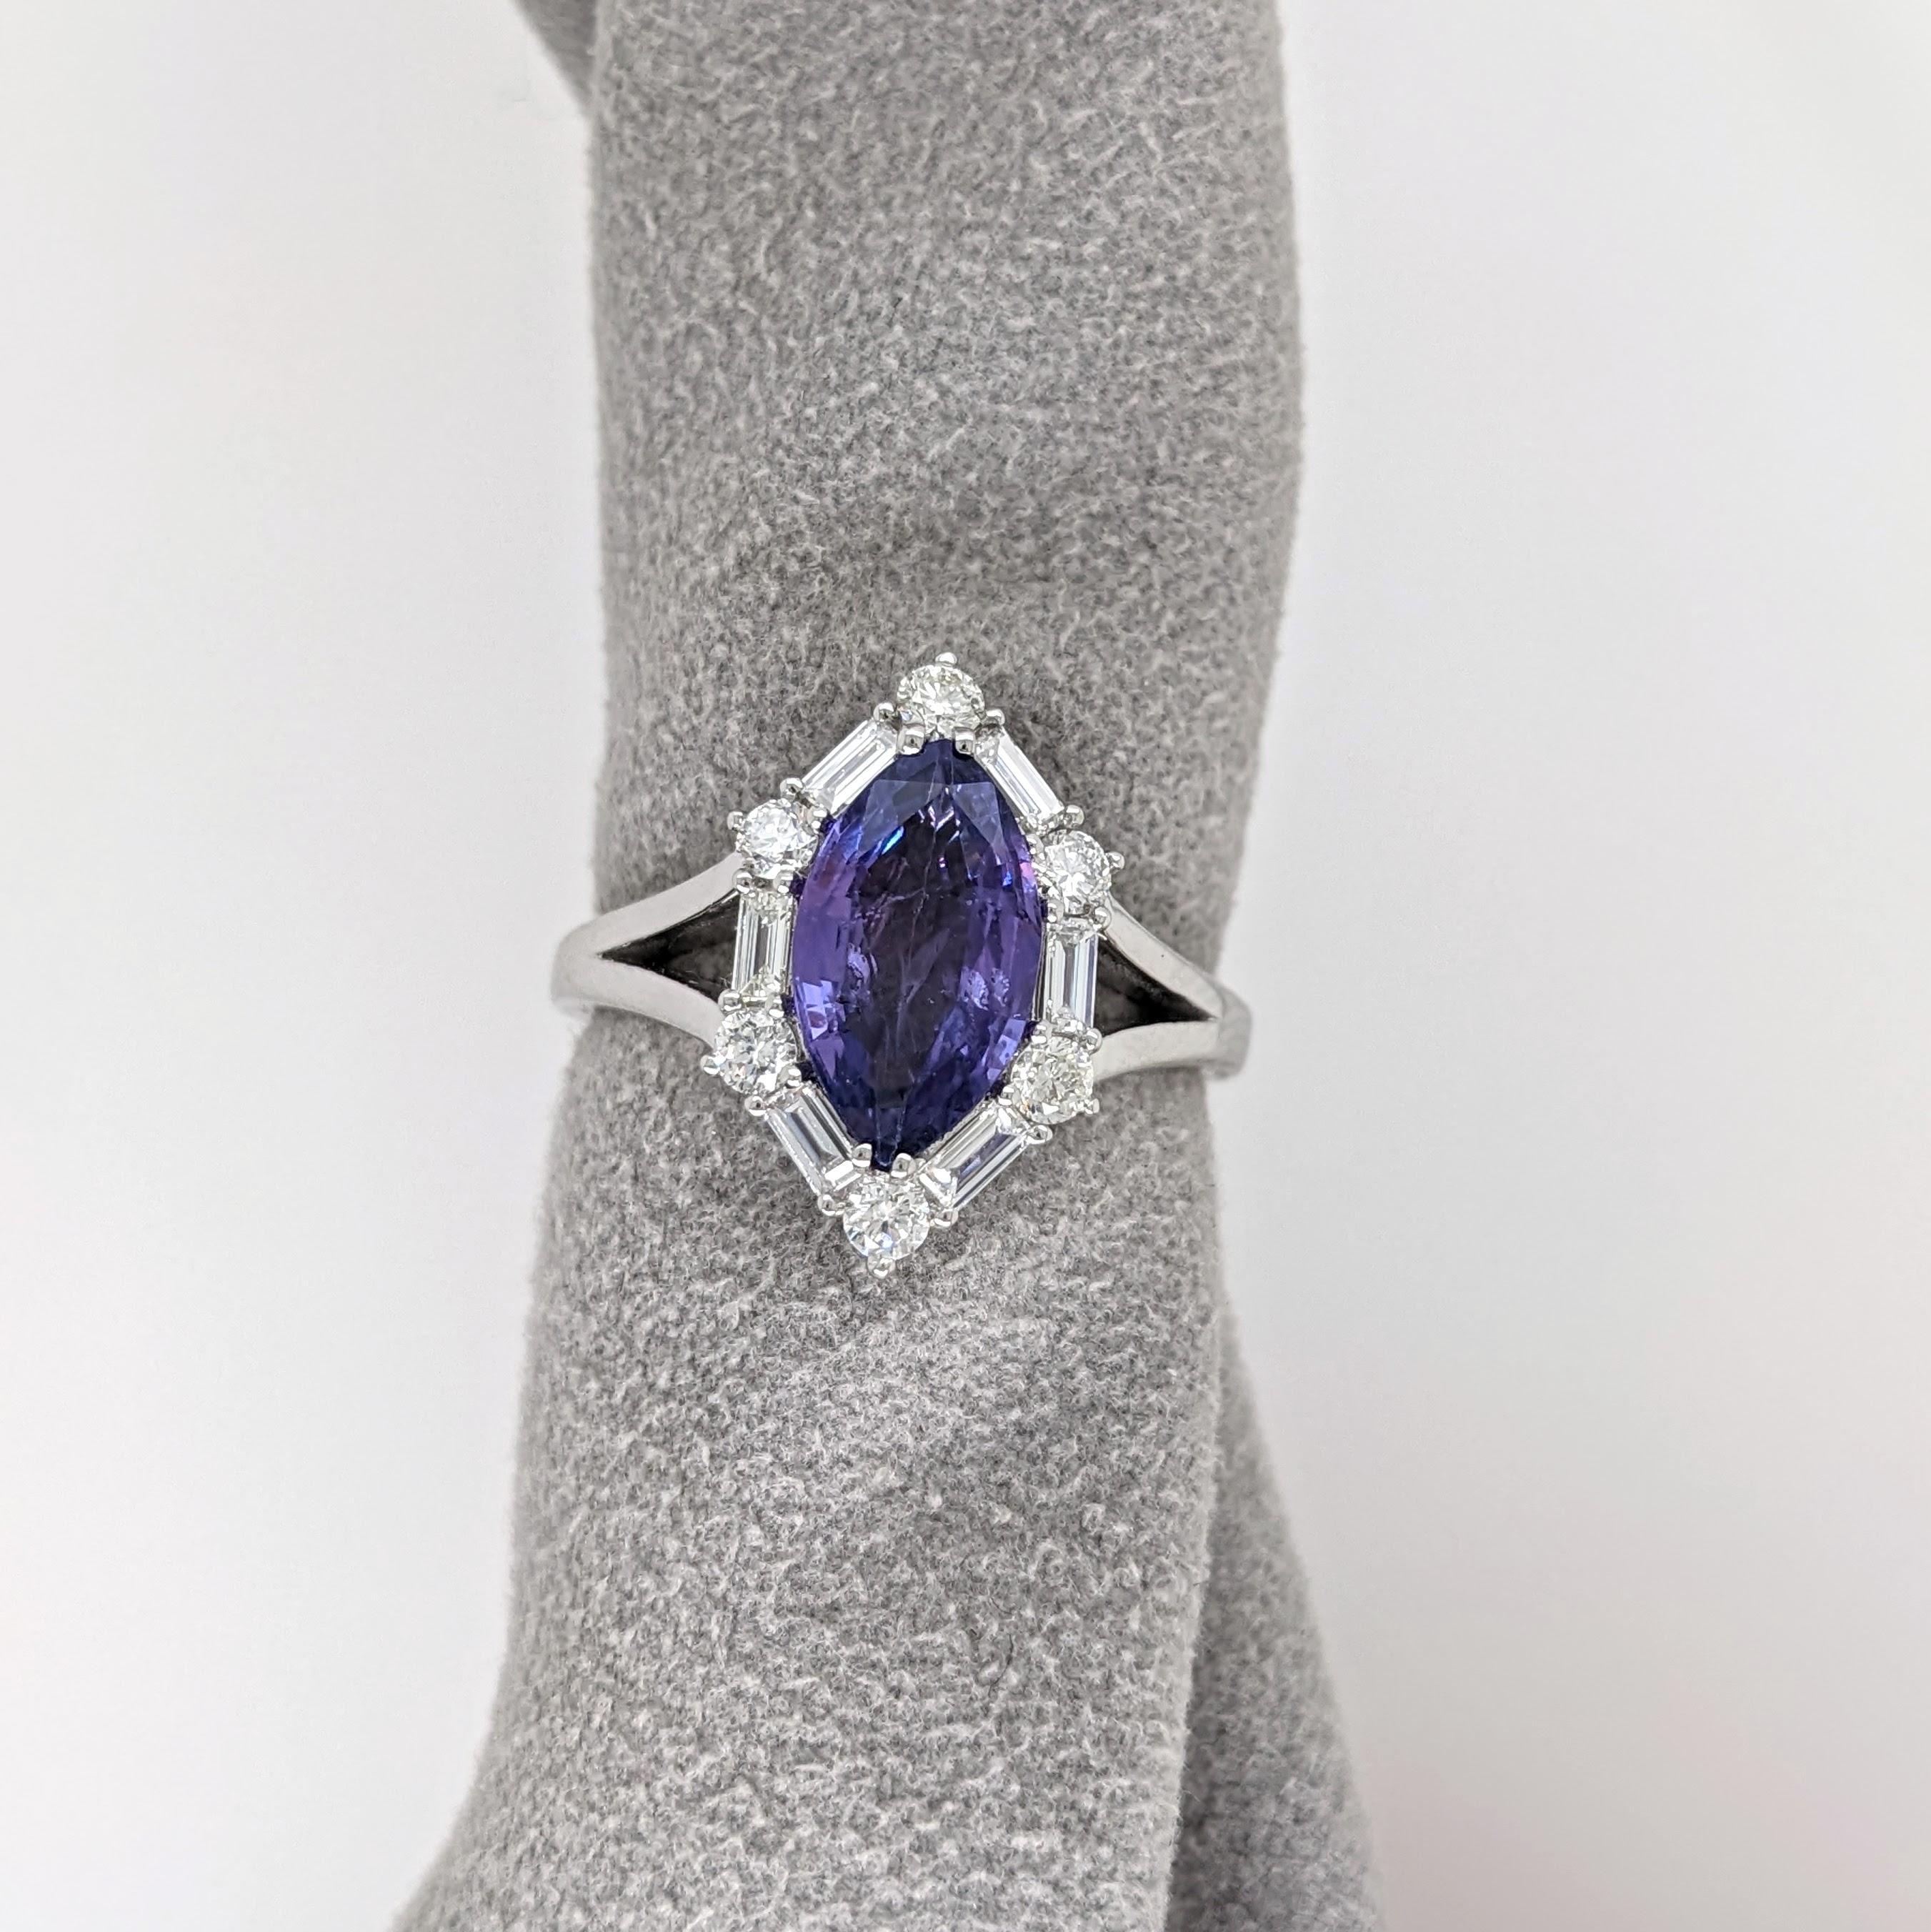 This unique ring features a 2 carat marquise shape purple sapphire gemstone with natural earth mined diamonds, all set in solid 14K gold. This ring can be a beautiful September birthstone gift for your loved ones! 

Specifications

Item Type: